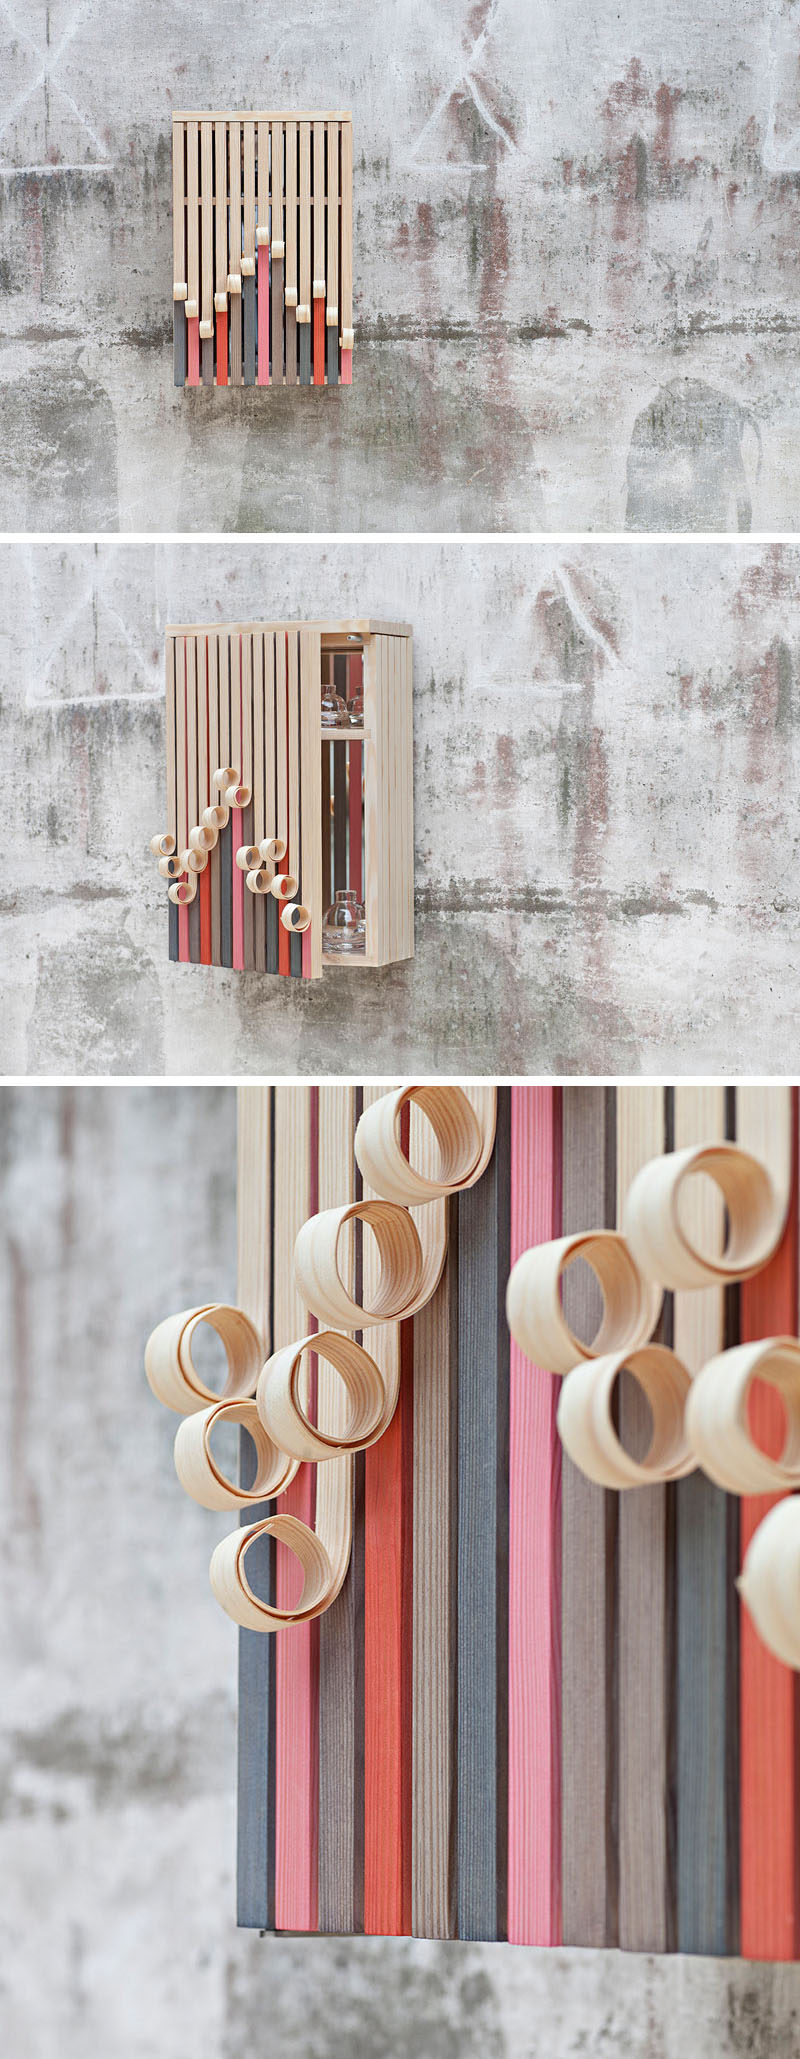 Swedish design firm Stoft Studio, have created the 'Whittle Away' collection that includes a free-standing cabinet and a wall-mounted cabinet, with wood facades that appear to peel away to reveal the colorful form underneath. #ModernFurniture #Cabinets #FurnitureDesign